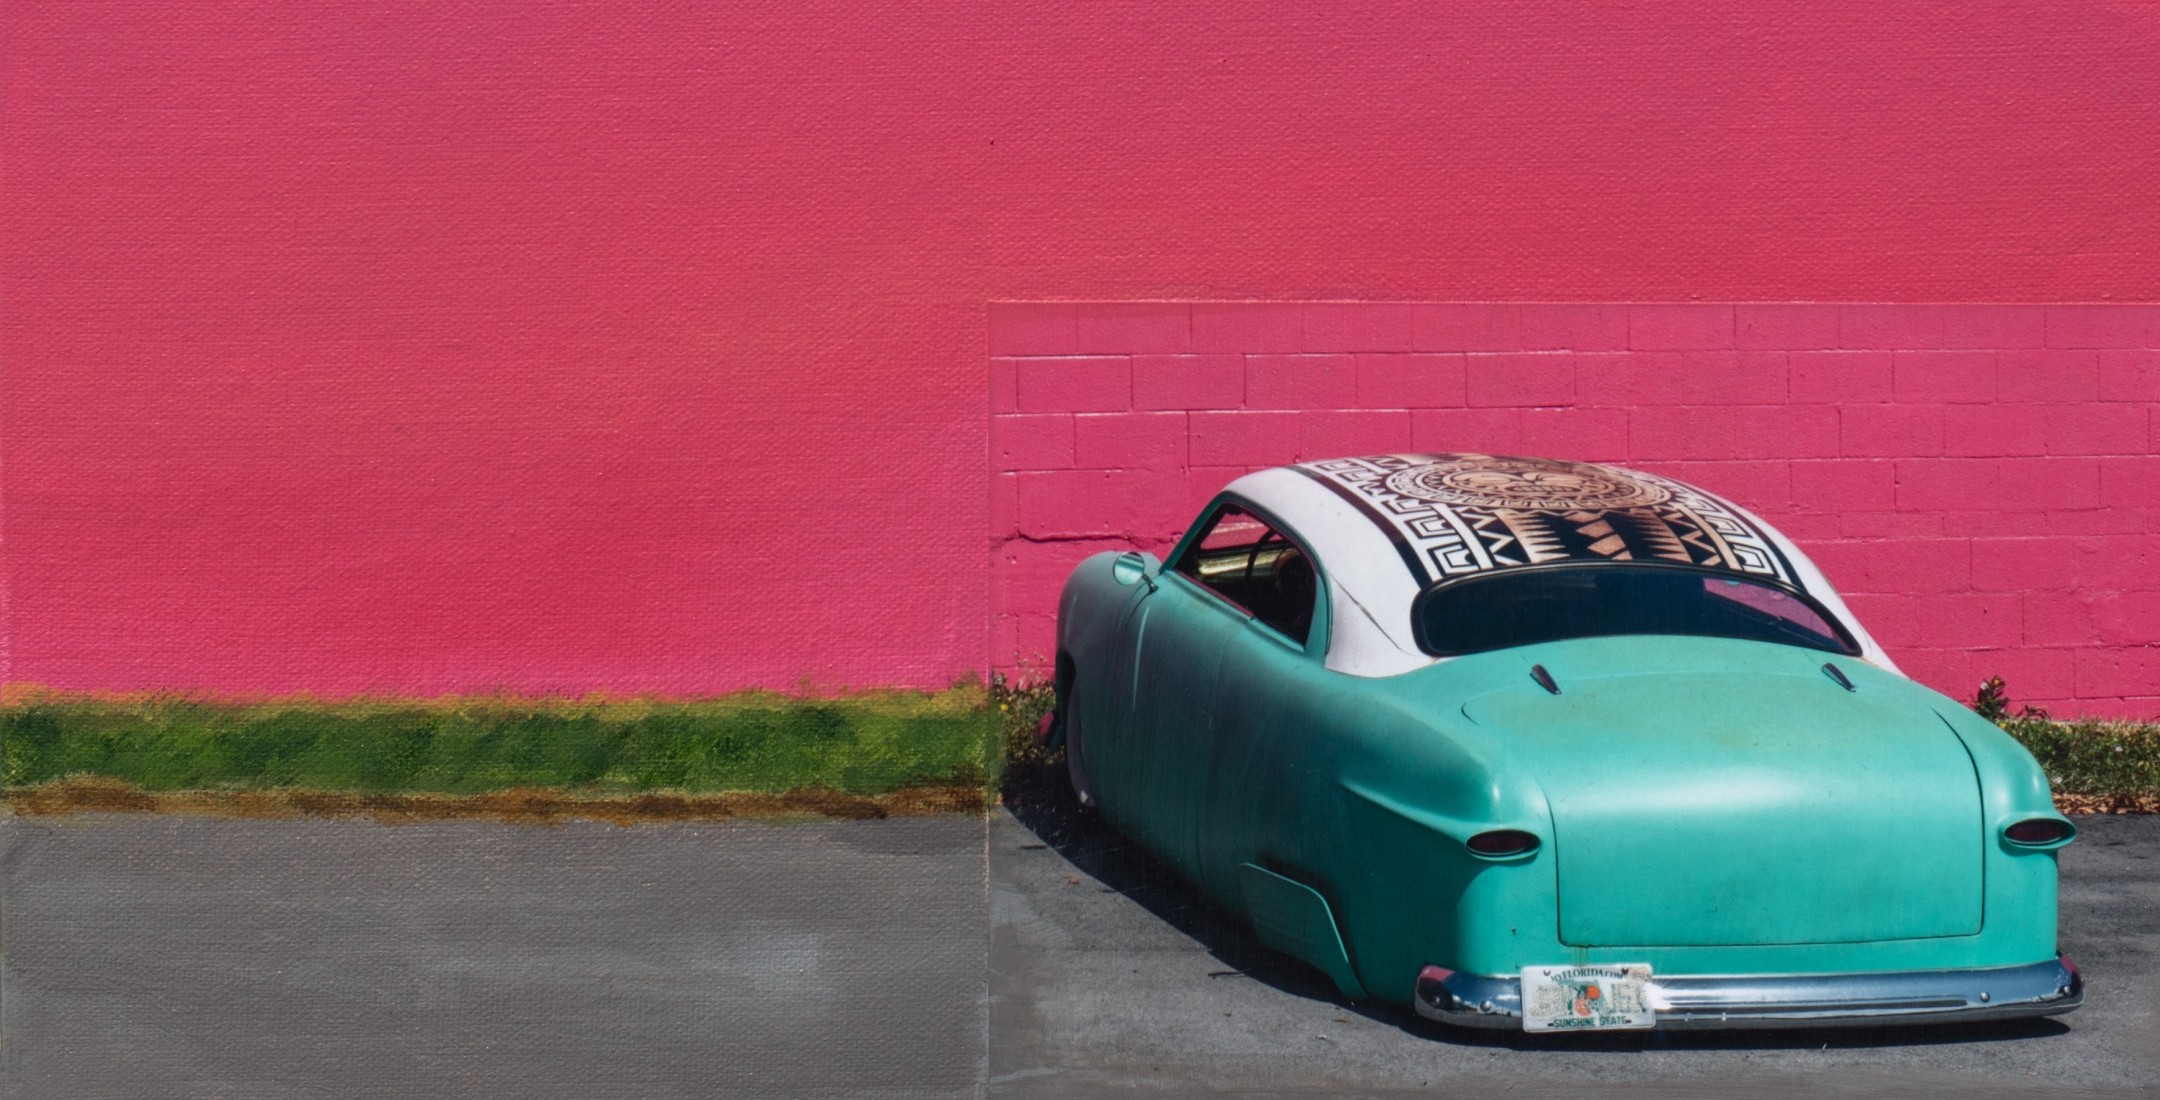 Collaged color photograph of a turquoise classic car in front of a pink painted wall.